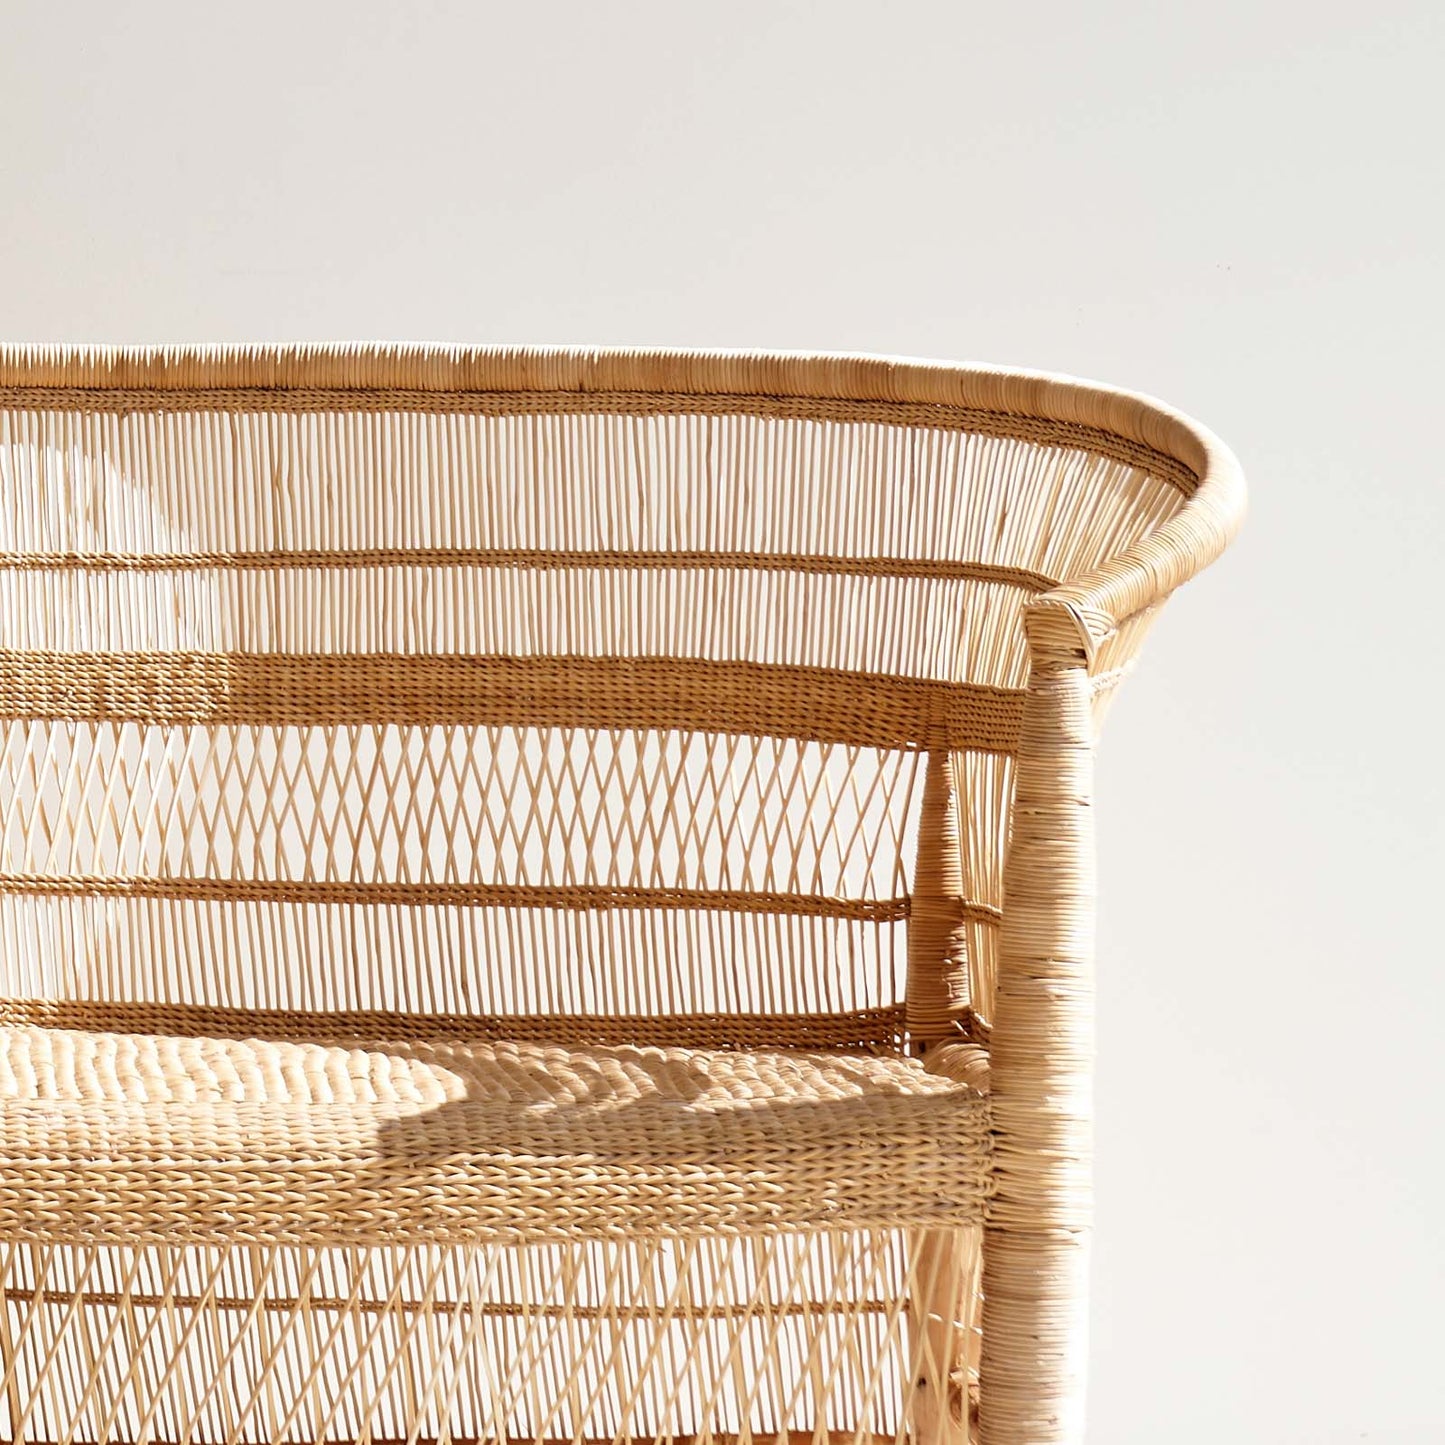 Malawi cane two-seater sofa, handwoven in rattan and bamboo. Sustainable and Fair Trade from MalawiMalawi